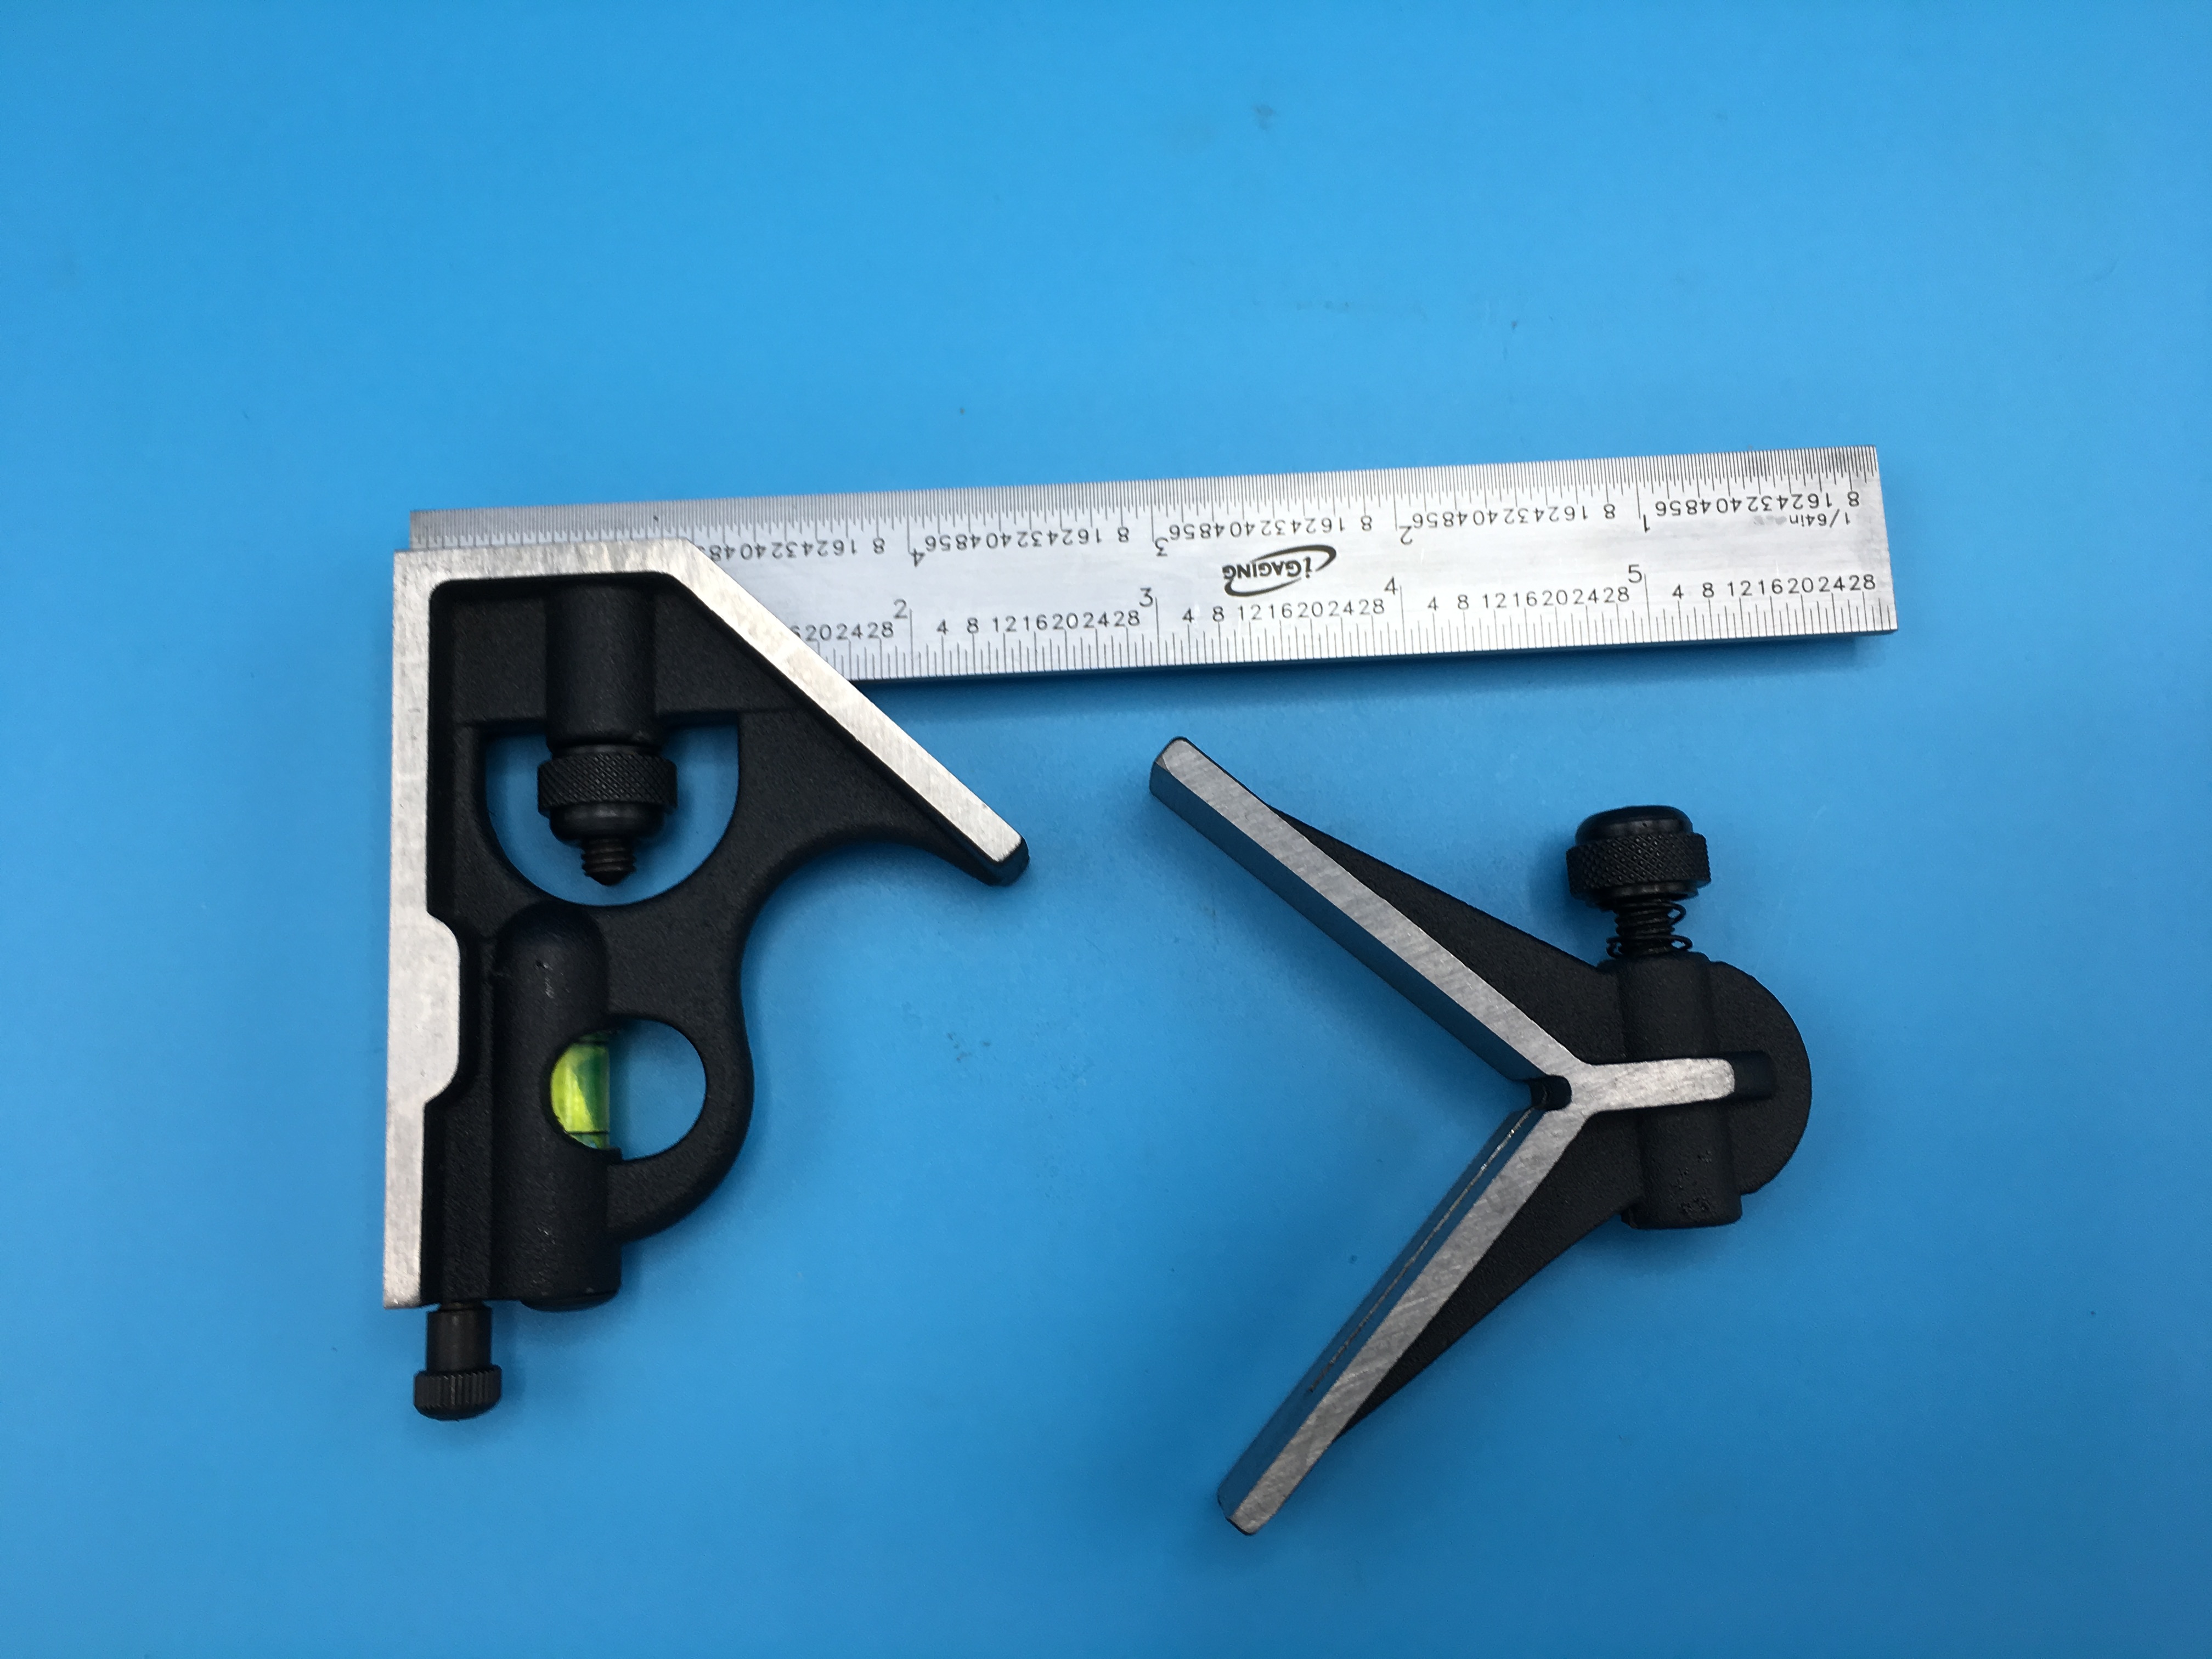 iGaging 3 piece 6" Precision Combination Square and Center Finder Head 4R Blade 